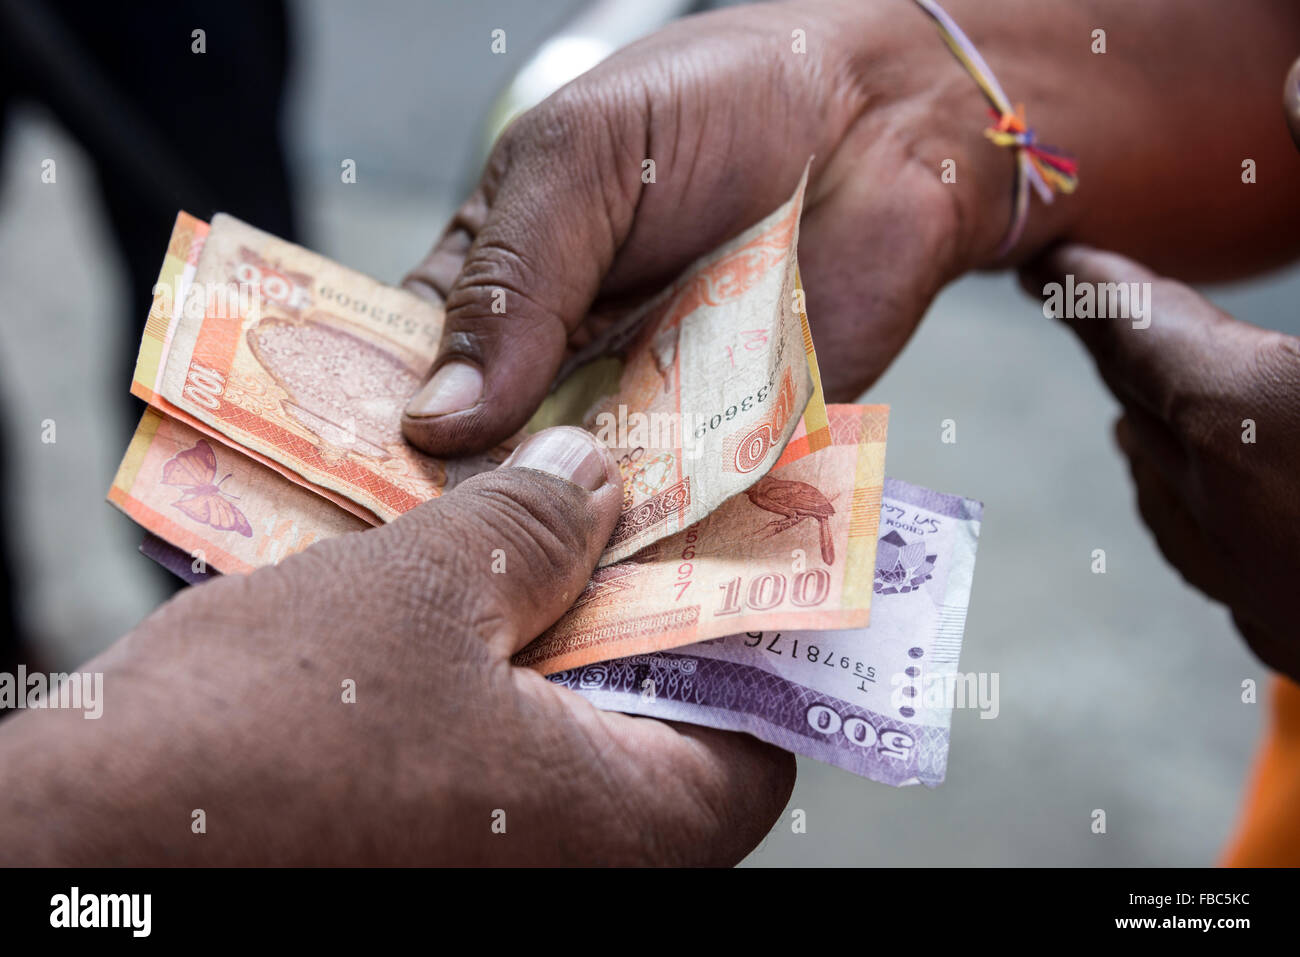 Sri Lankan currency notes Stock Photo